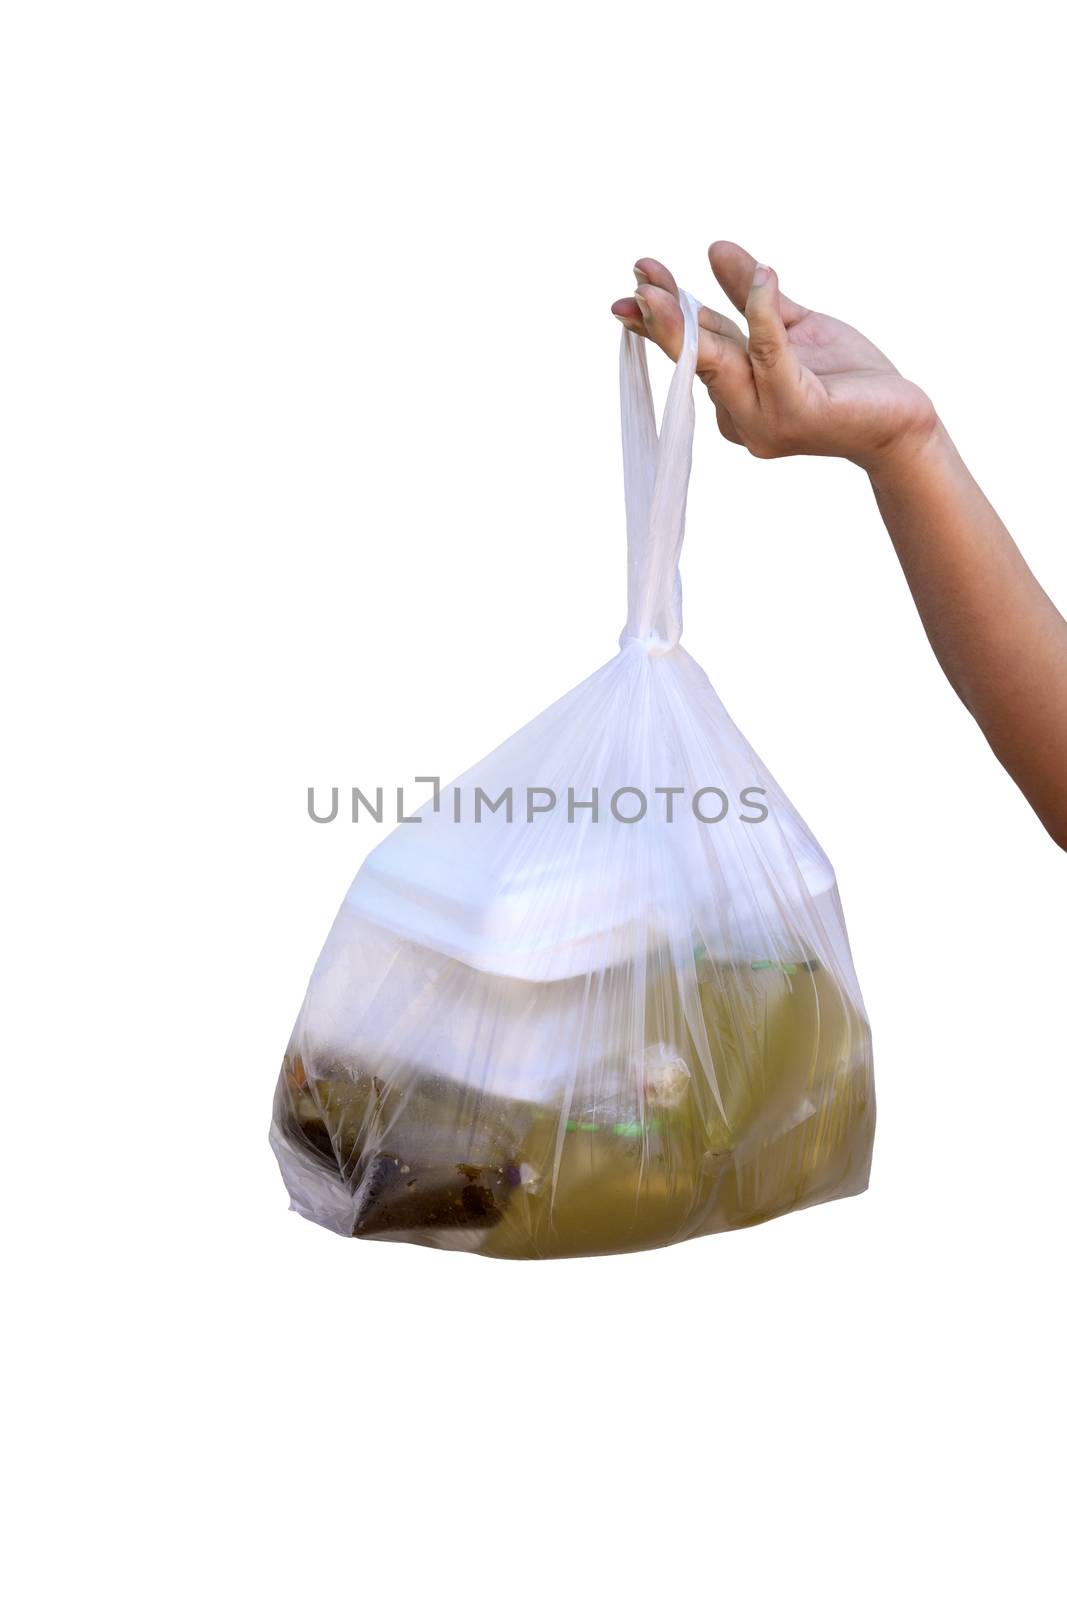 A woman's hand is holding a plastic bag to hold food